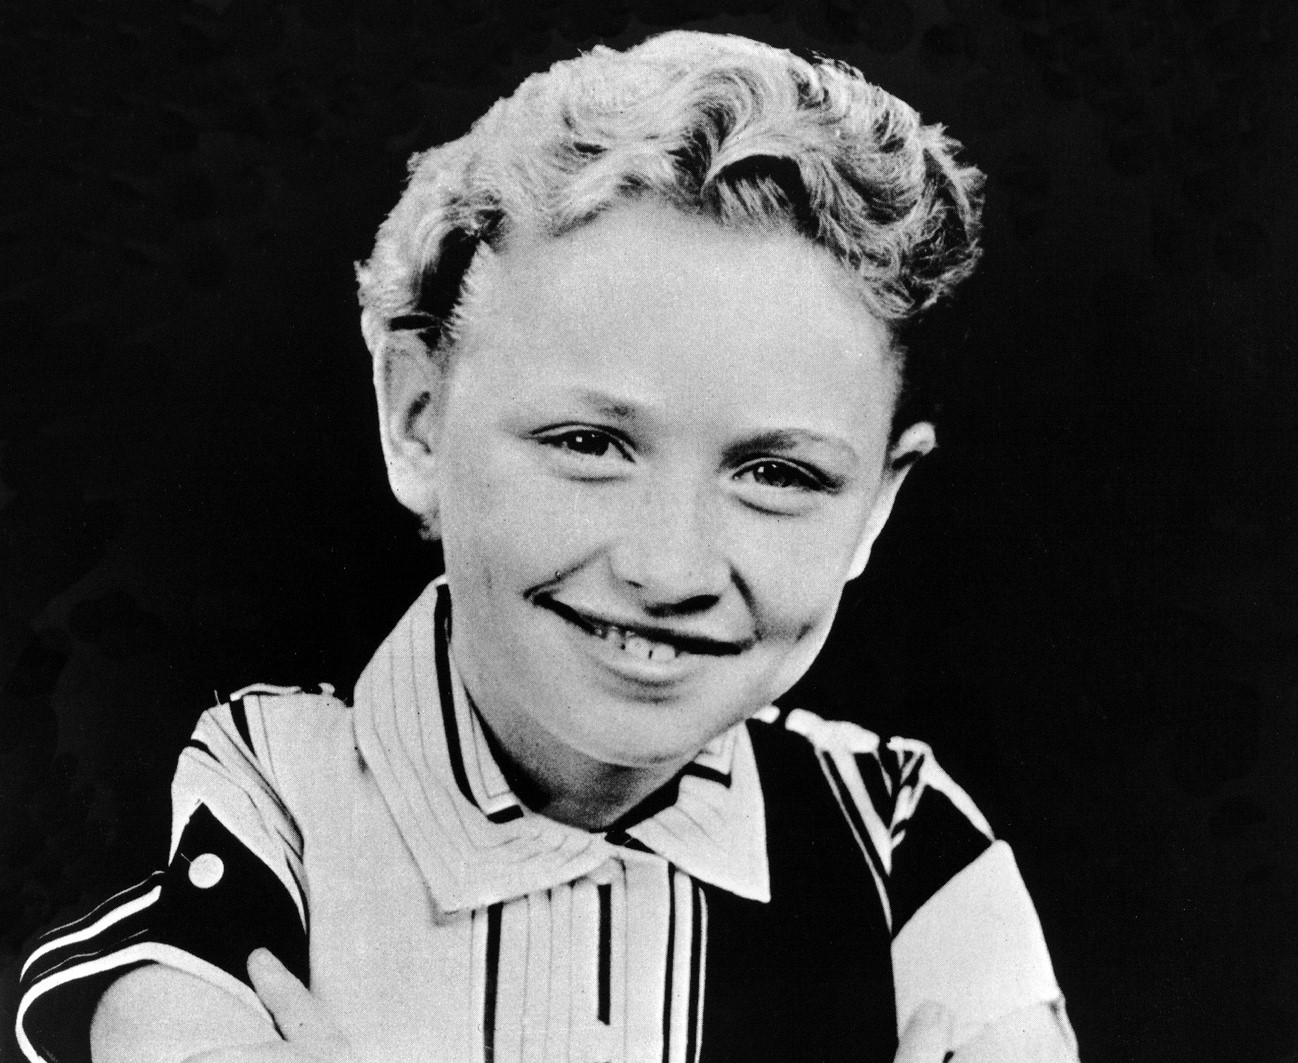 A black and white picture of Dolly Parton as a child wearing a striped shirt.